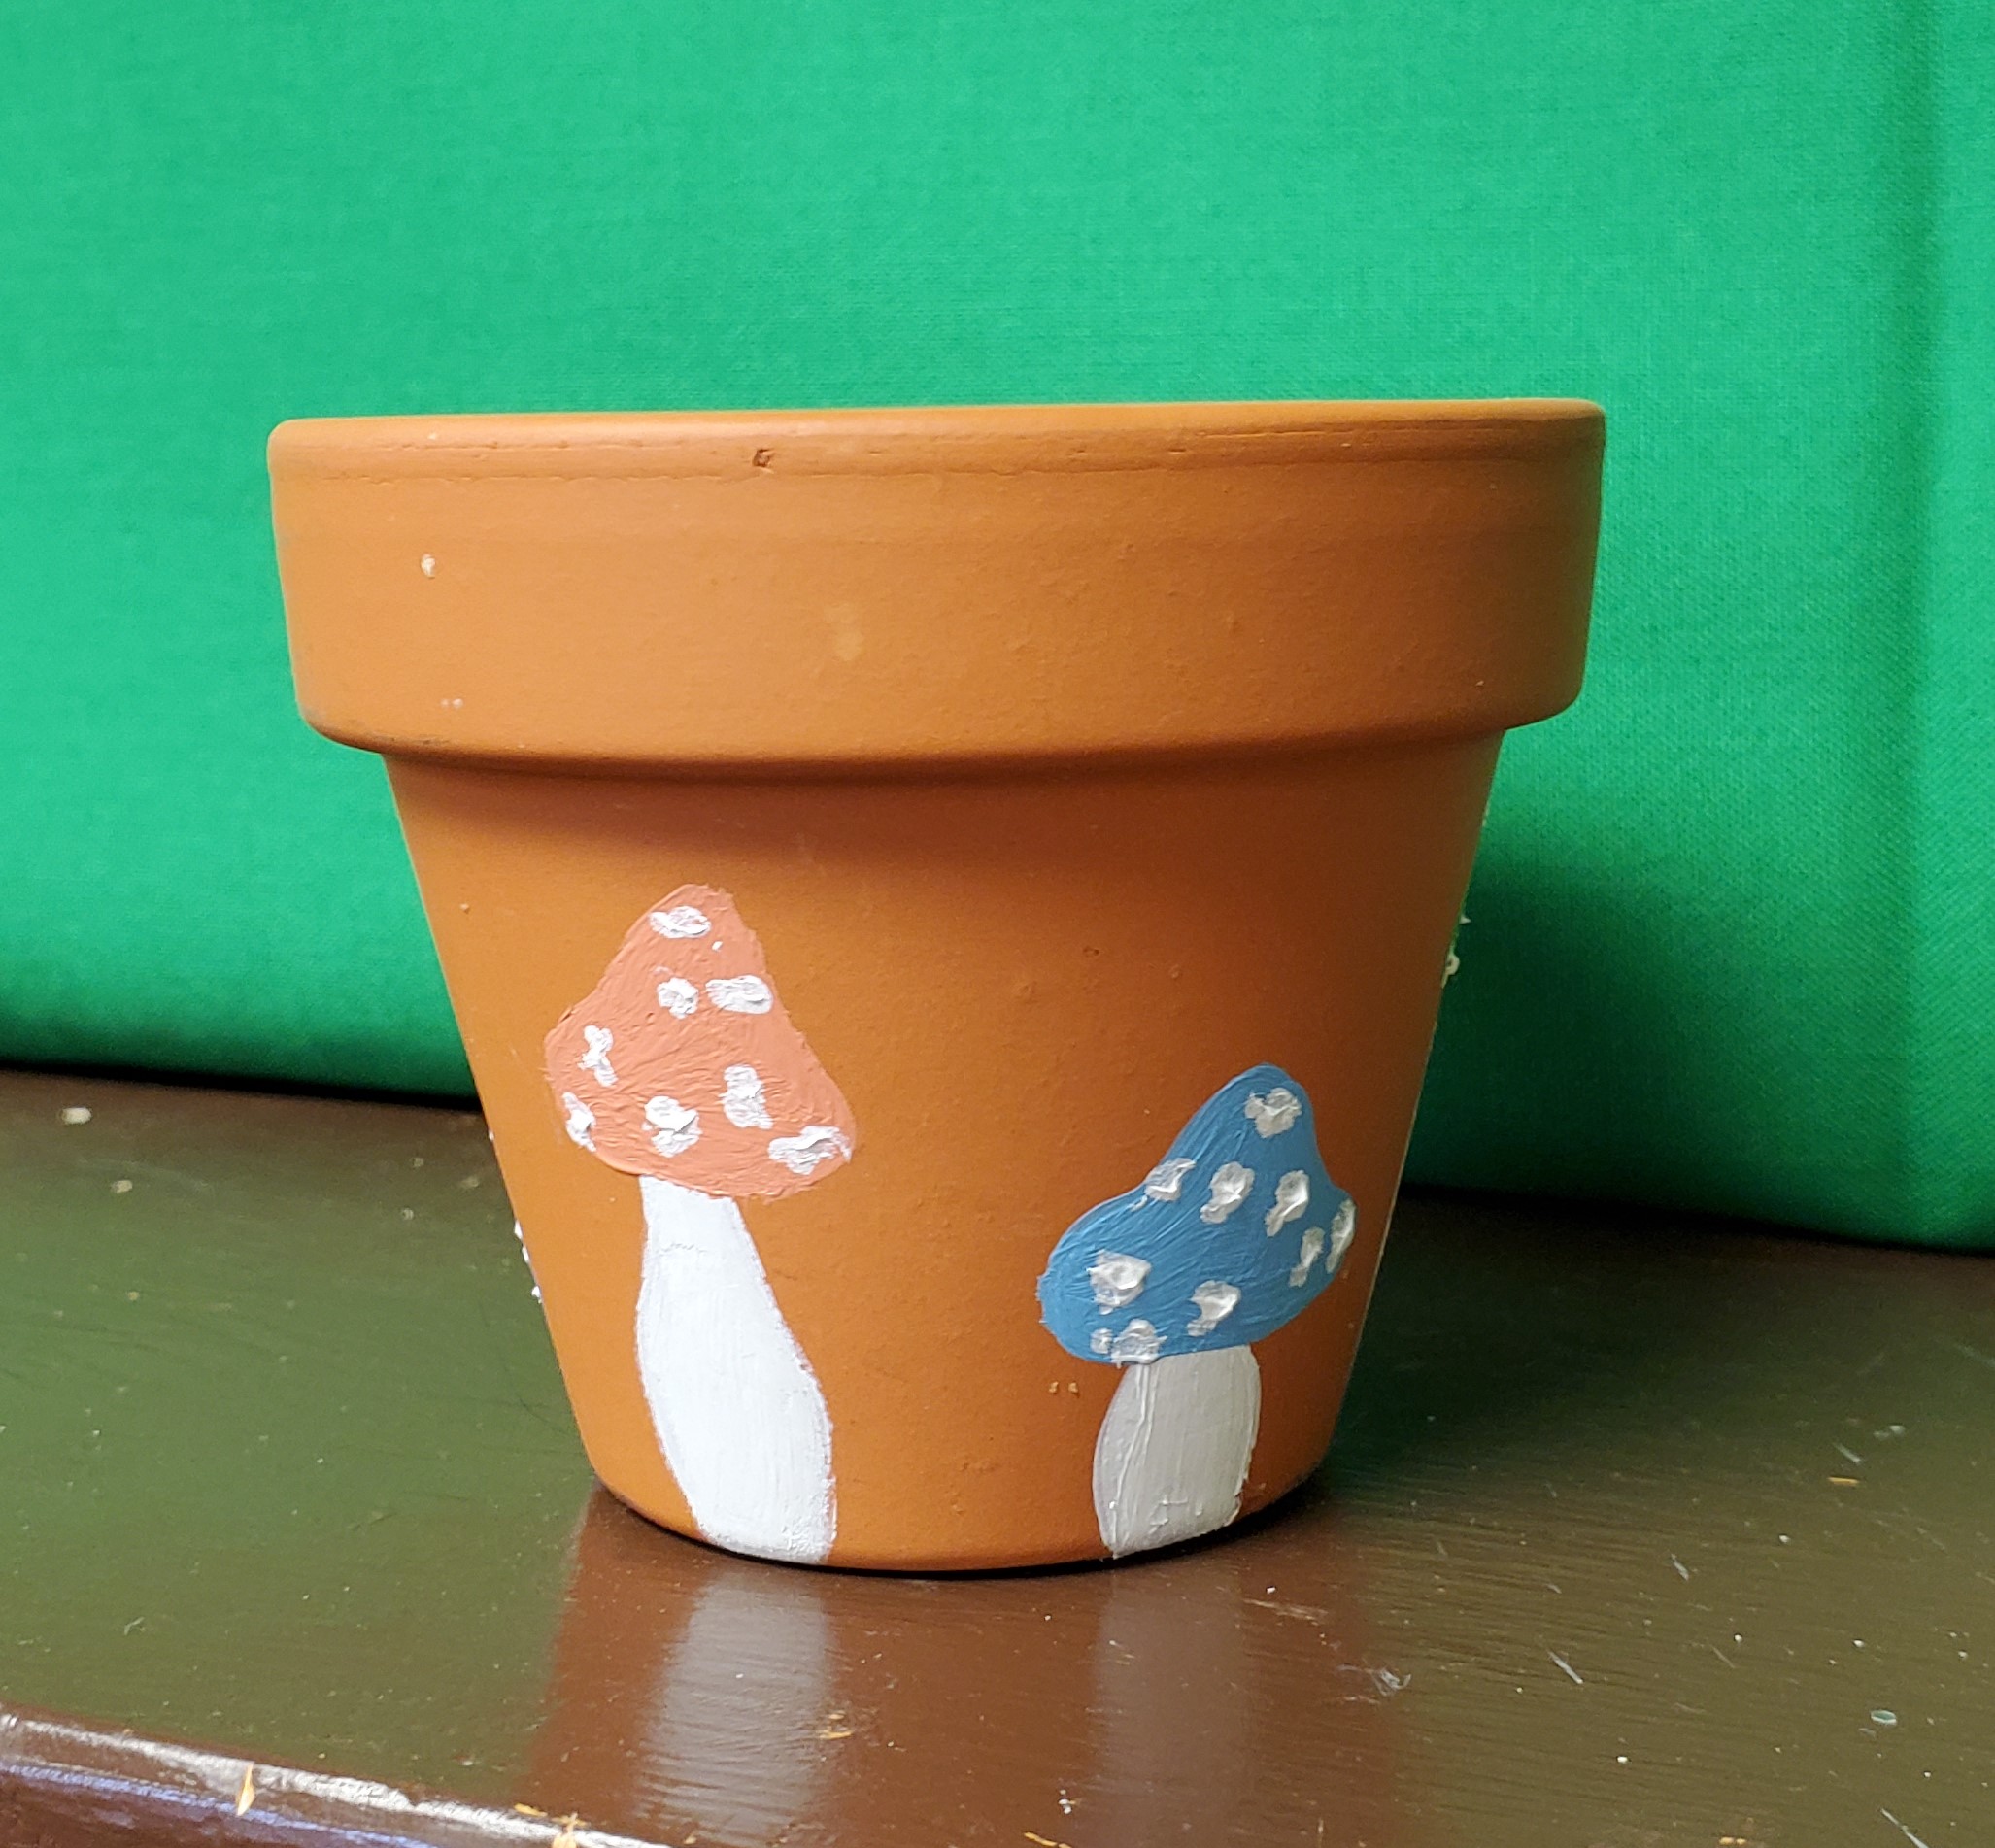 A brown planter with mushrooms painted on it in front of a green wall.